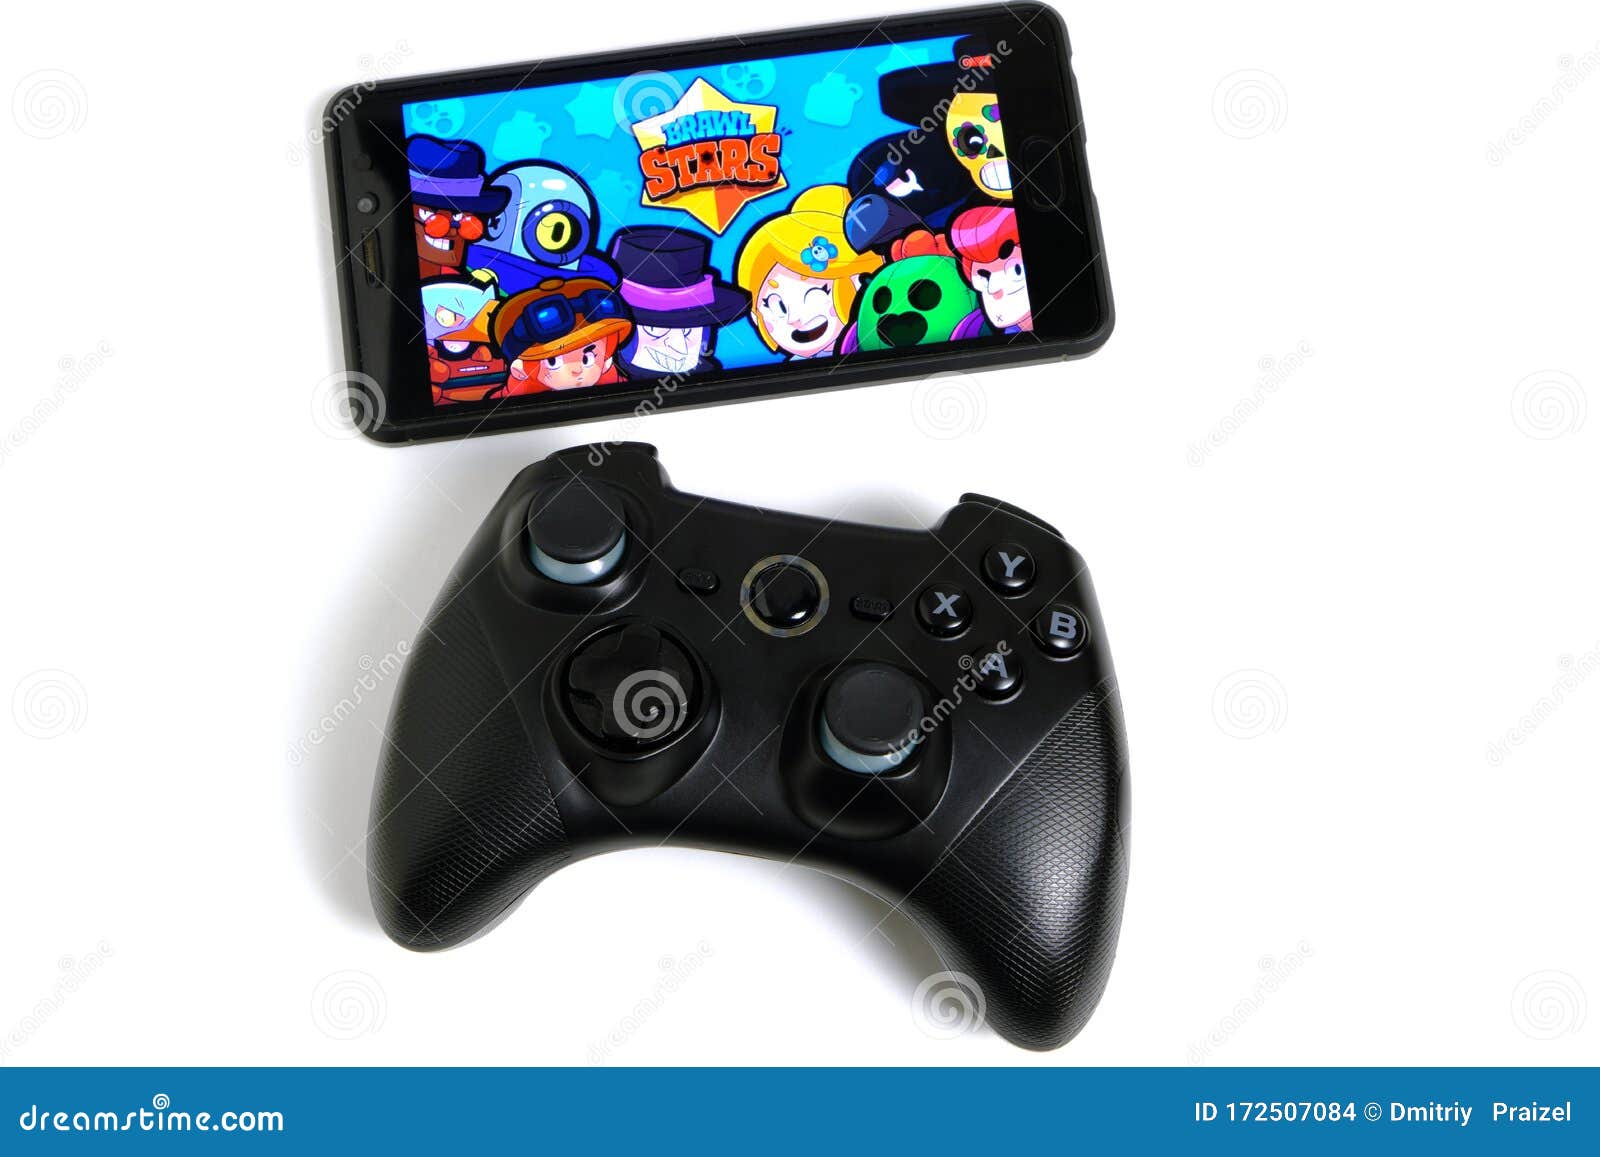 Kostanay Kazakhstan February 12 2020 Joystick And Mobile Phone With The Logo Of The Popular Game Brawl Stars From Supercell On Editorial Stock Image Image Of Background Cell 172507084 - brawl stars joystick 2021